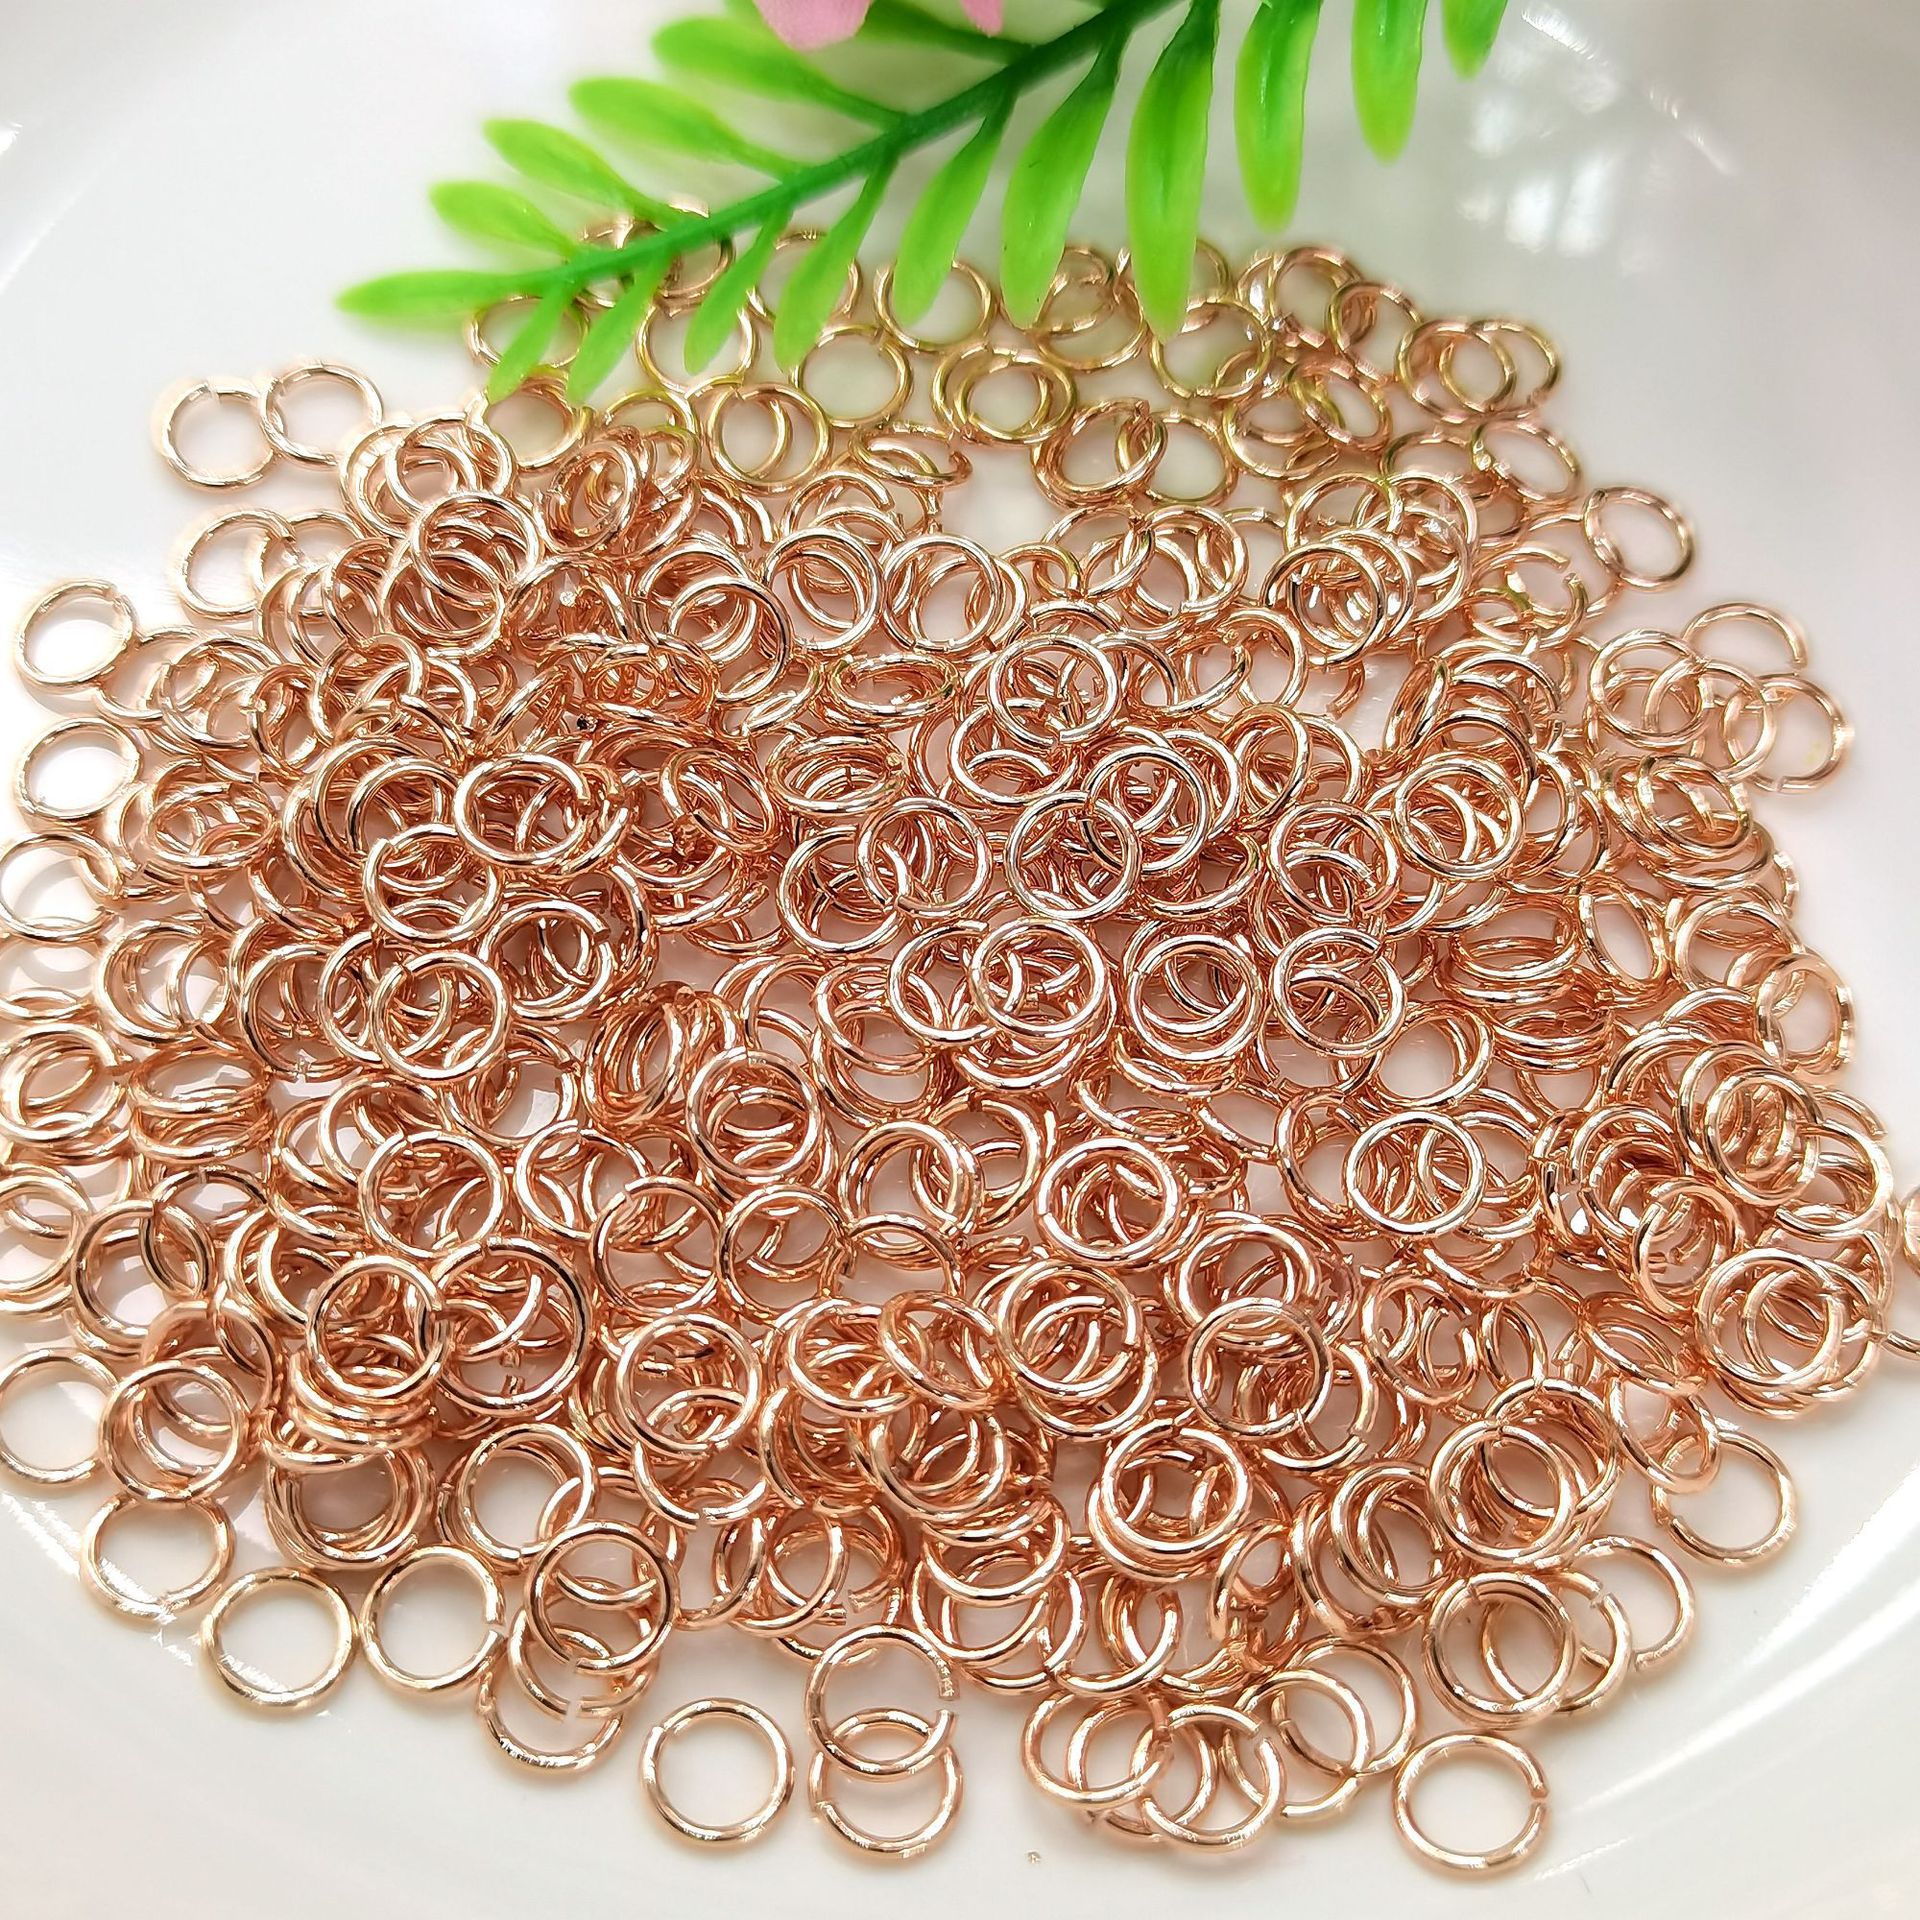 Rose gold 0.6*4mm (about 38 pieces per gram)